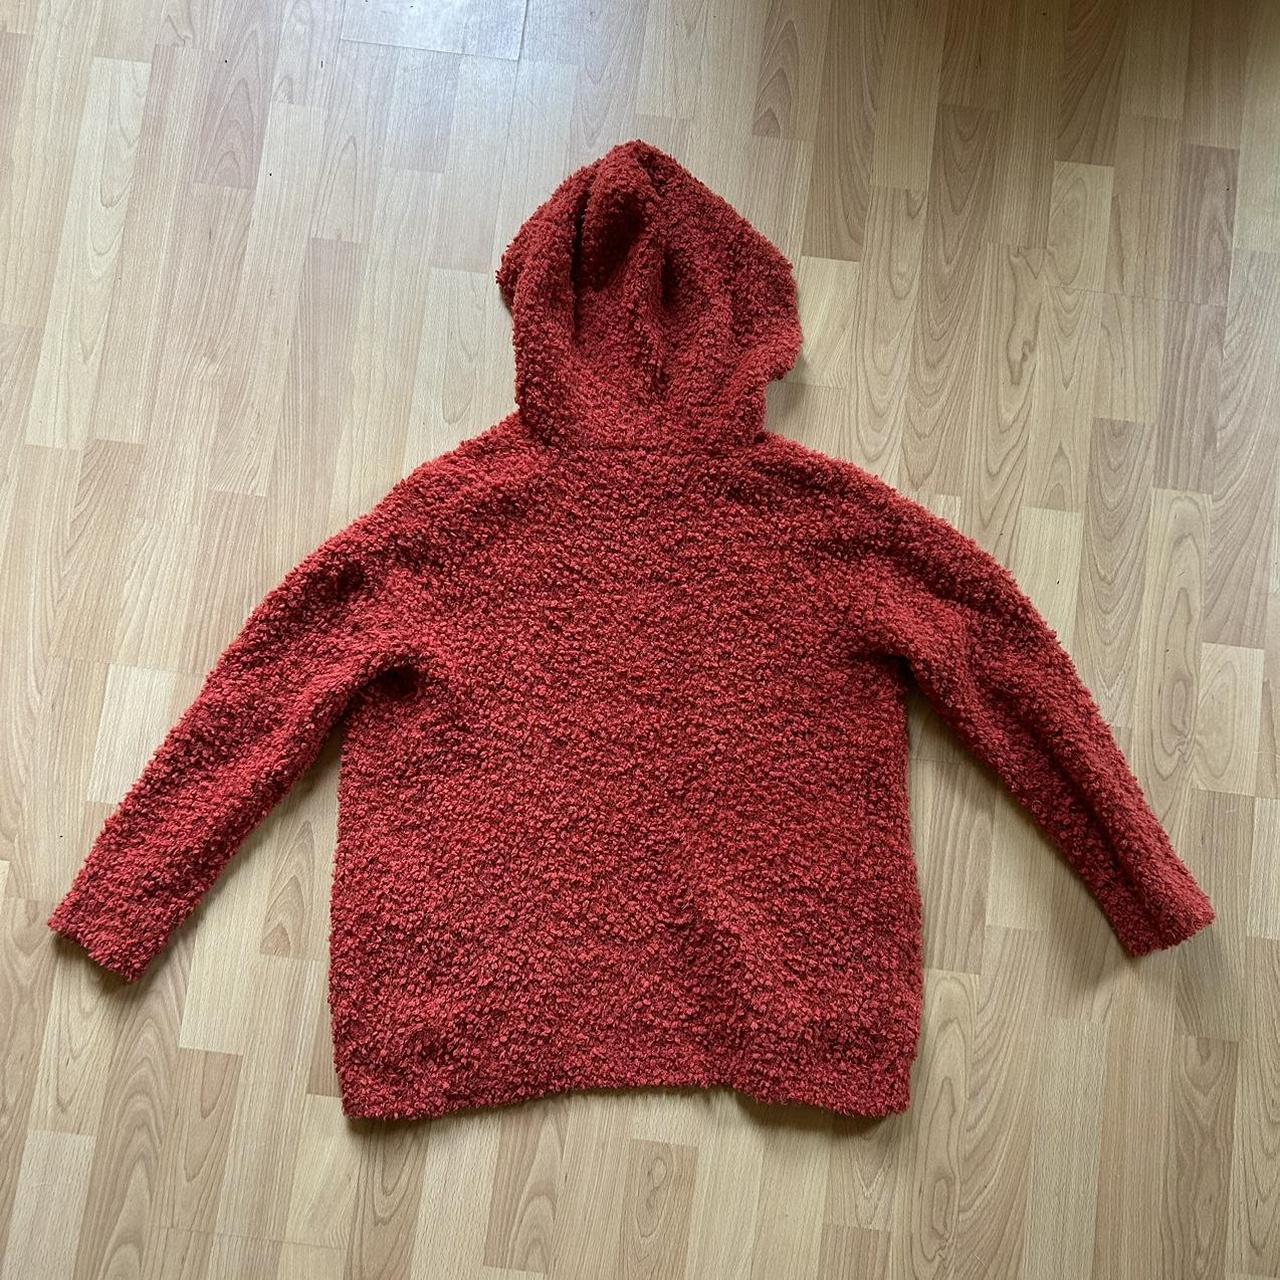 Red fuzzy pile cardigan ️says size small but has an... - Depop